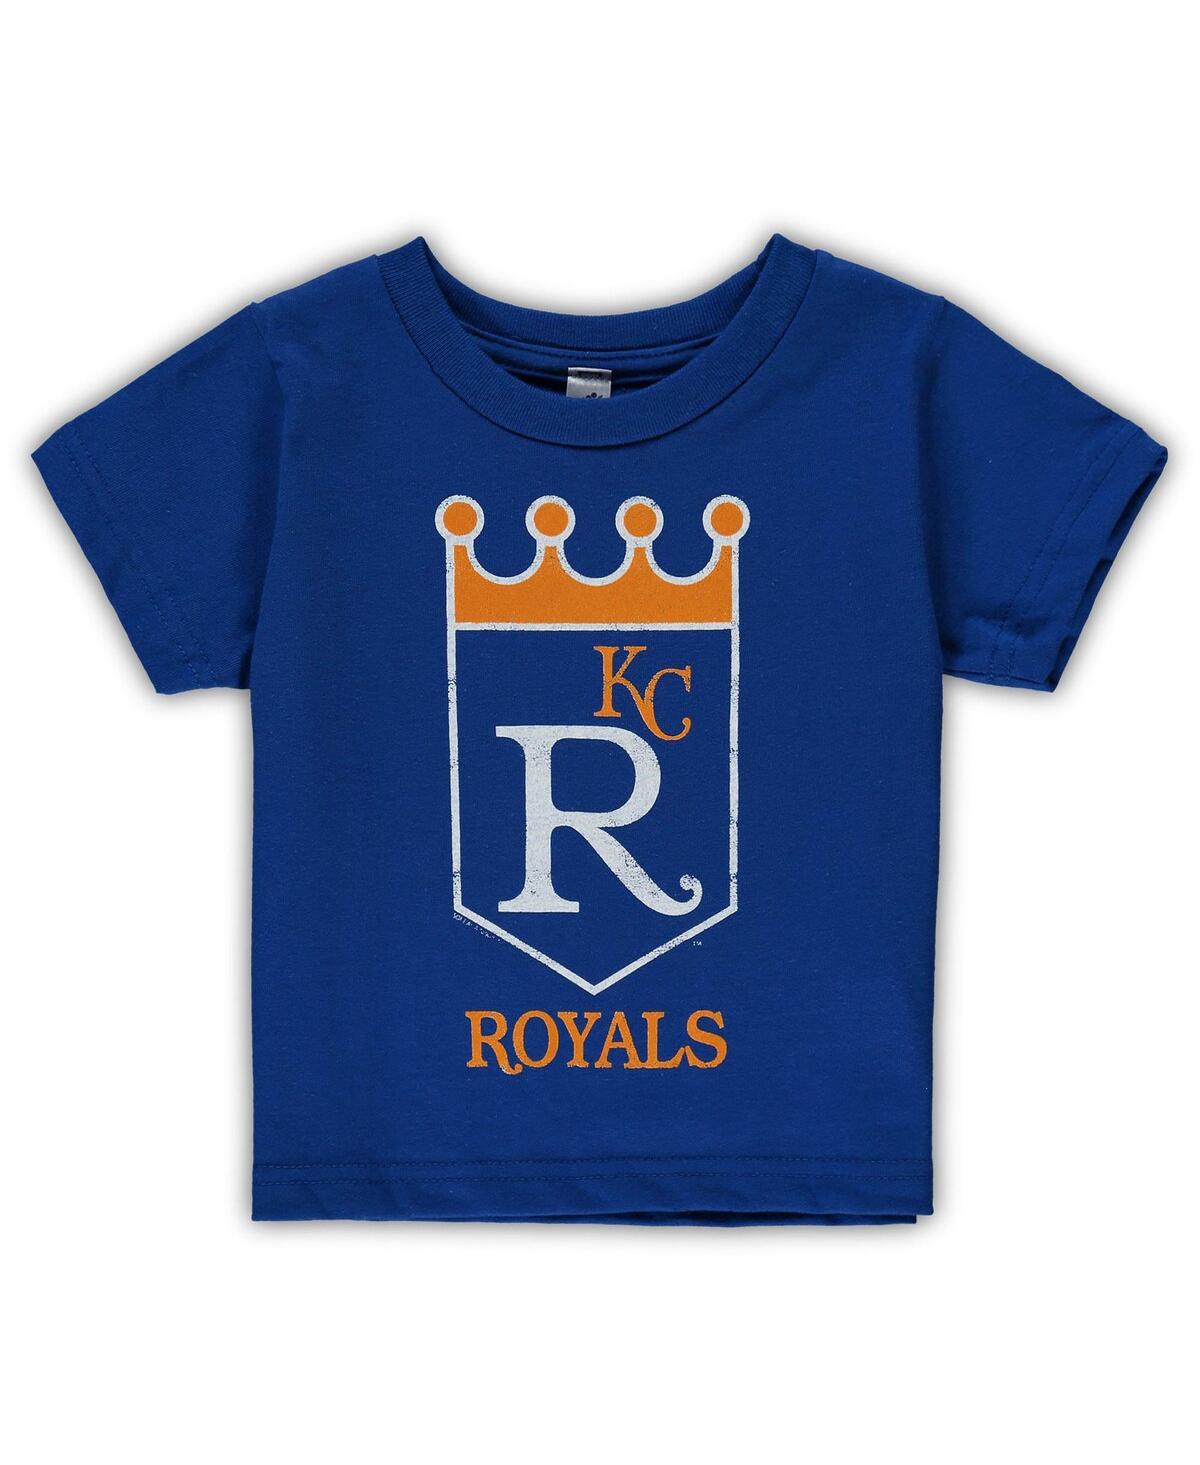 SOFT AS A GRAPE BOYS AND GIRLS TODDLER SOFT AS A GRAPE ROYAL KANSAS CITY ROYALS COOPERSTOWN COLLECTION SHUTOUT T-SHI